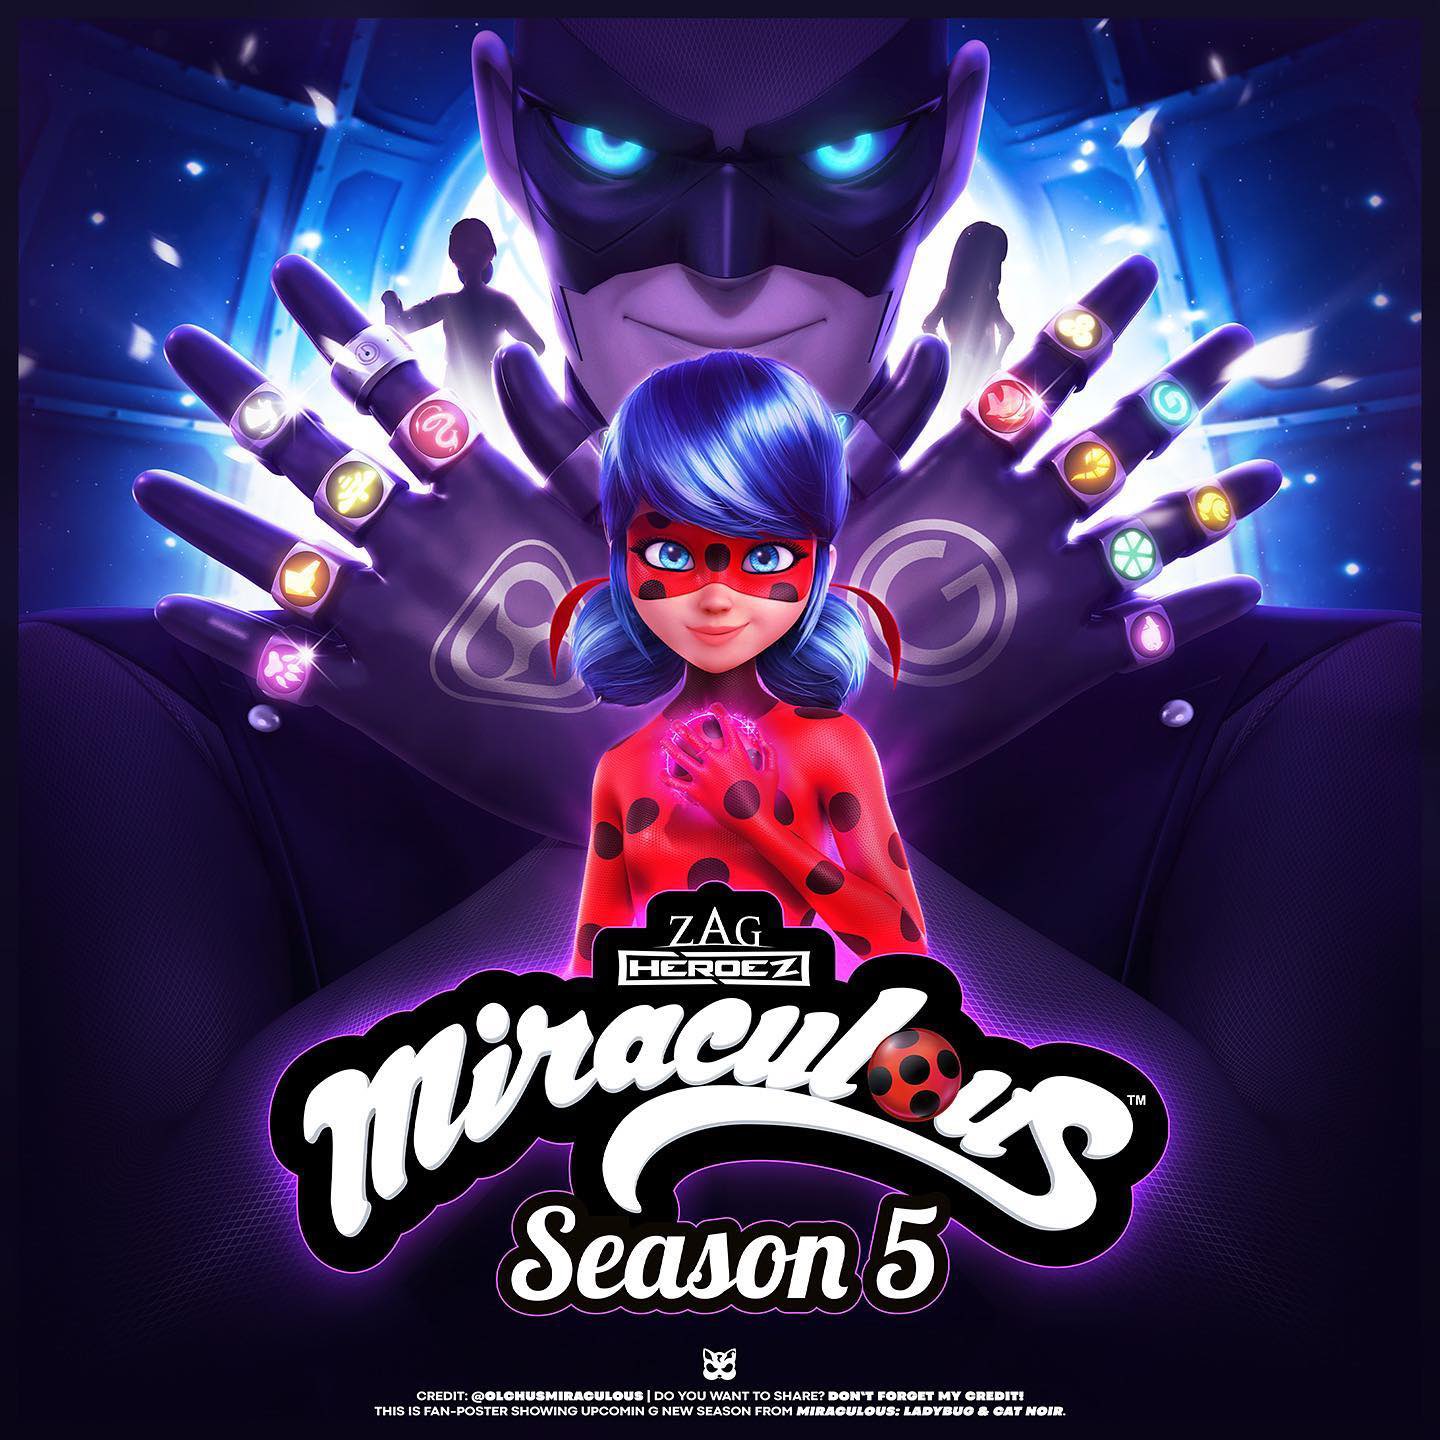 Season 5 poster is out!